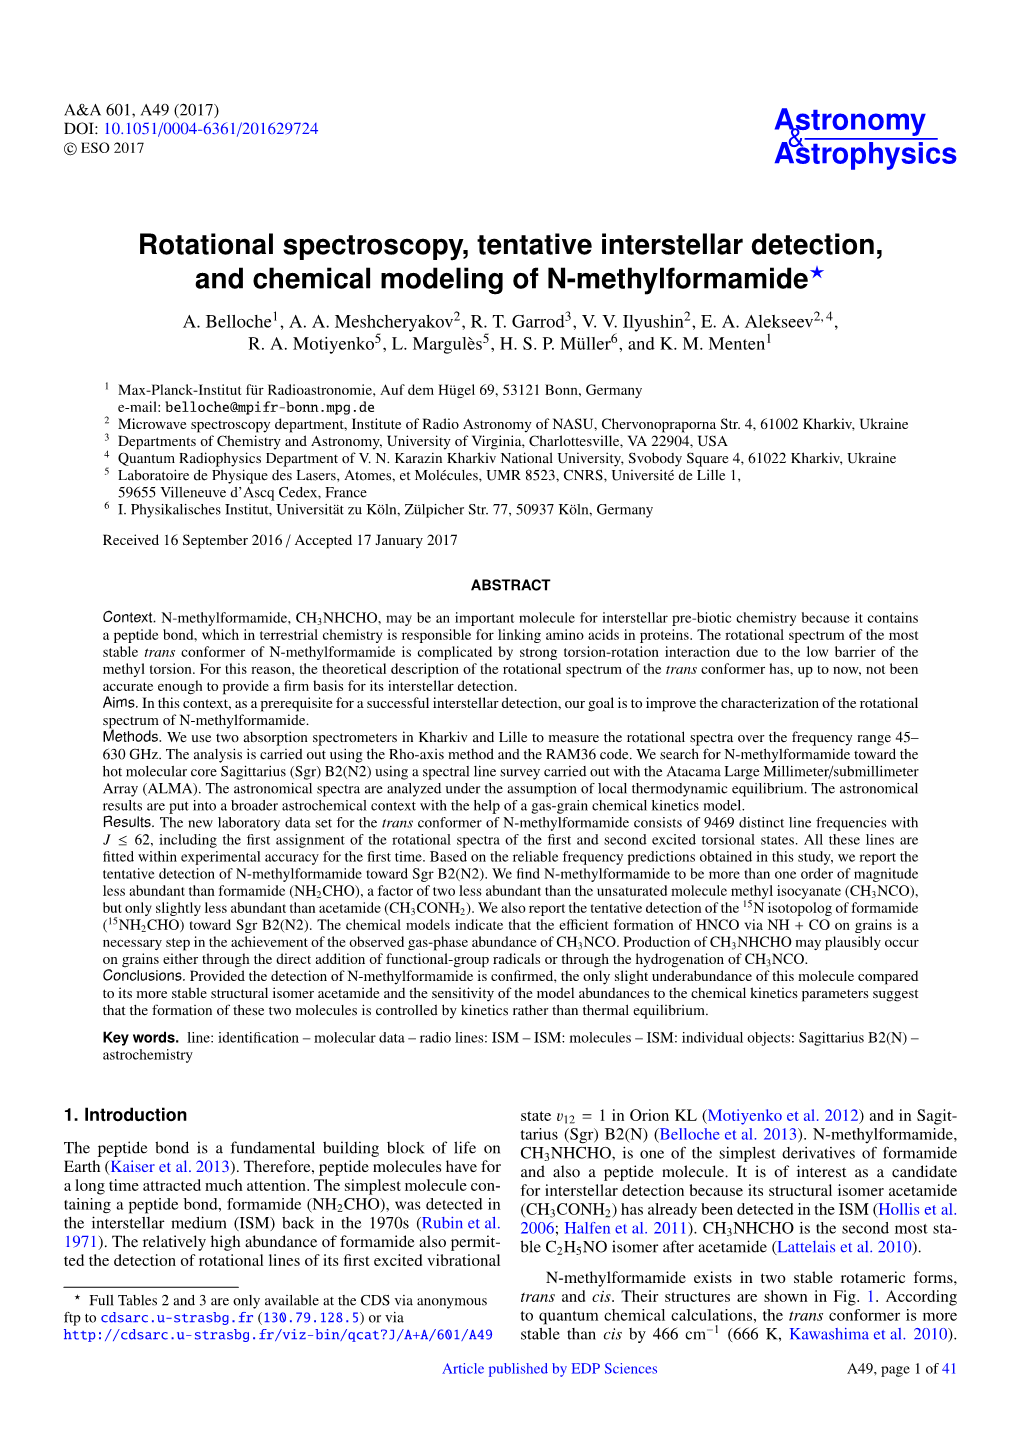 Rotational Spectroscopy, Tentative Interstellar Detection, and Chemical Modeling of N-Methylformamide? A